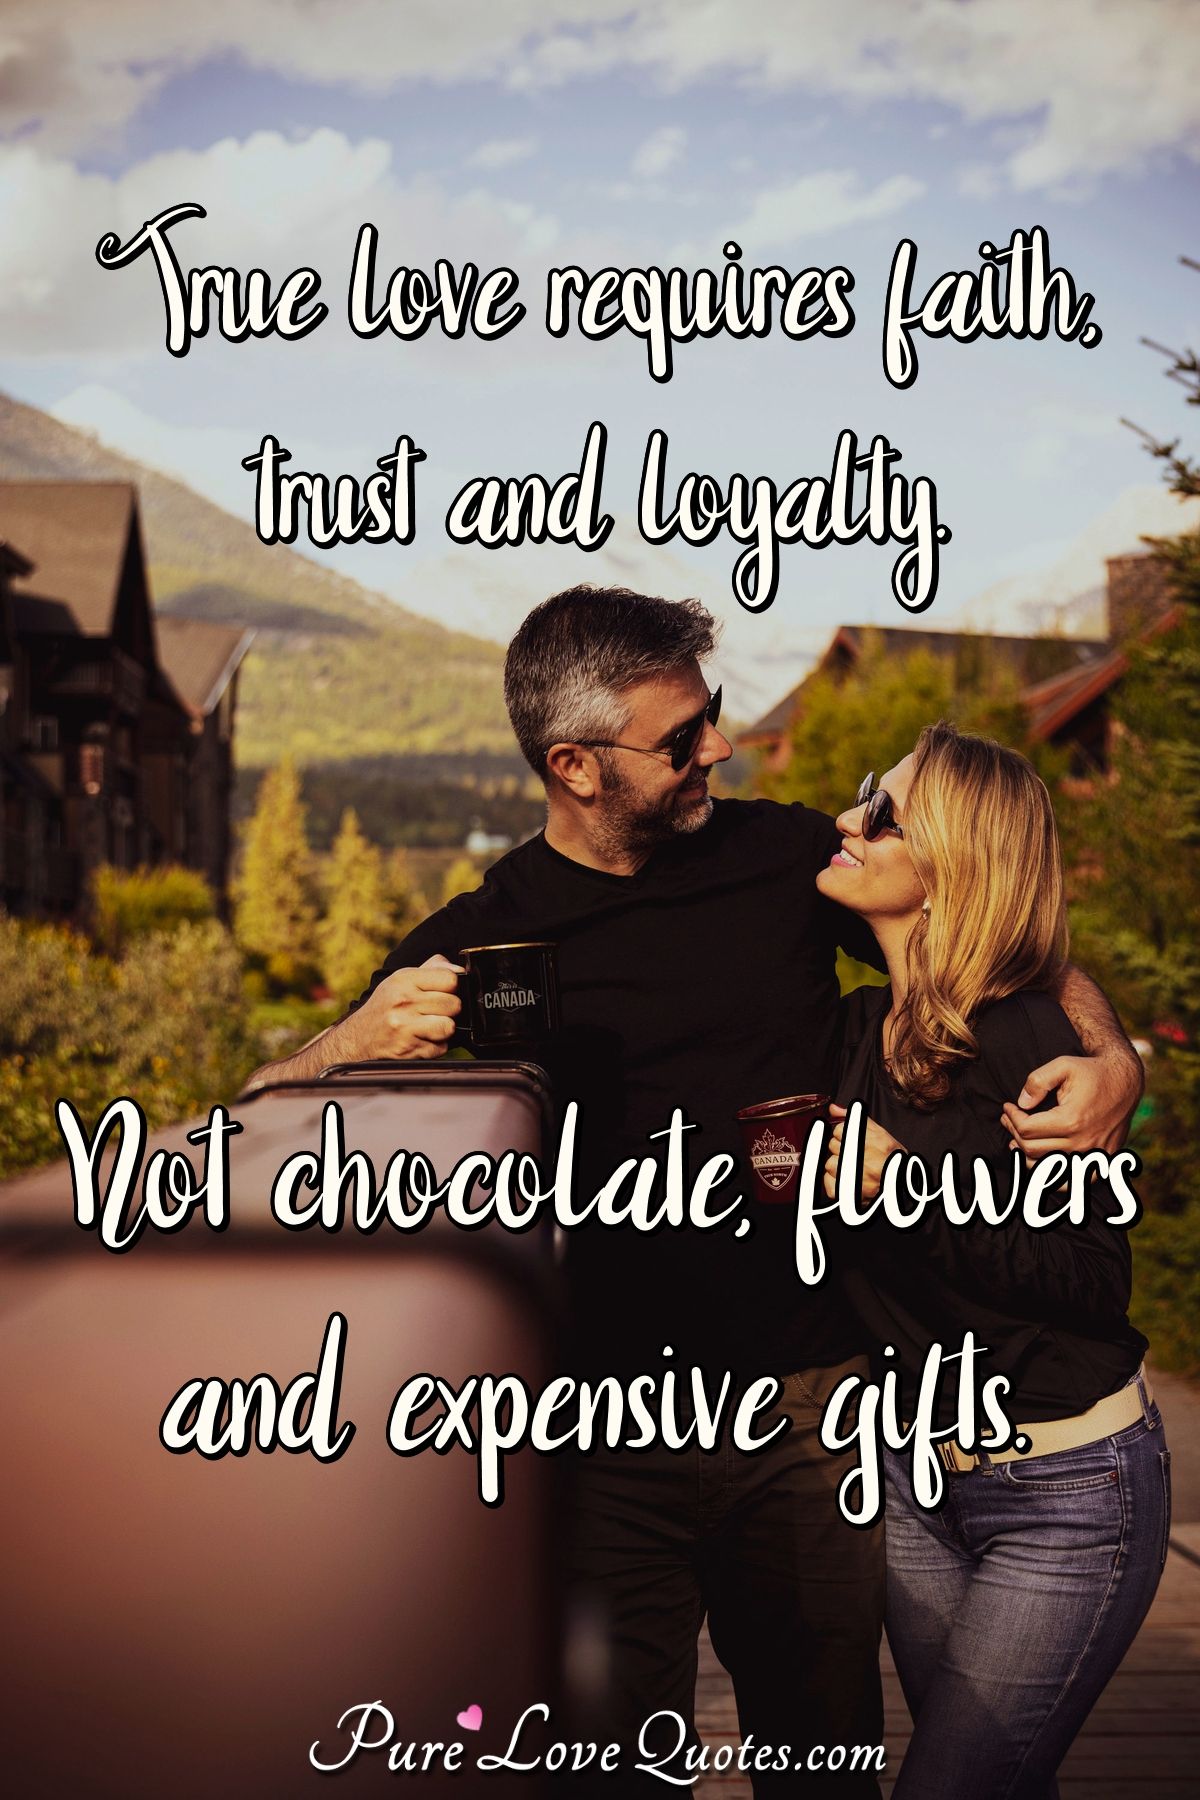 True love requires faith, trust and loyalty. Not chocolate, flowers and expensive gifts. - Anonymous